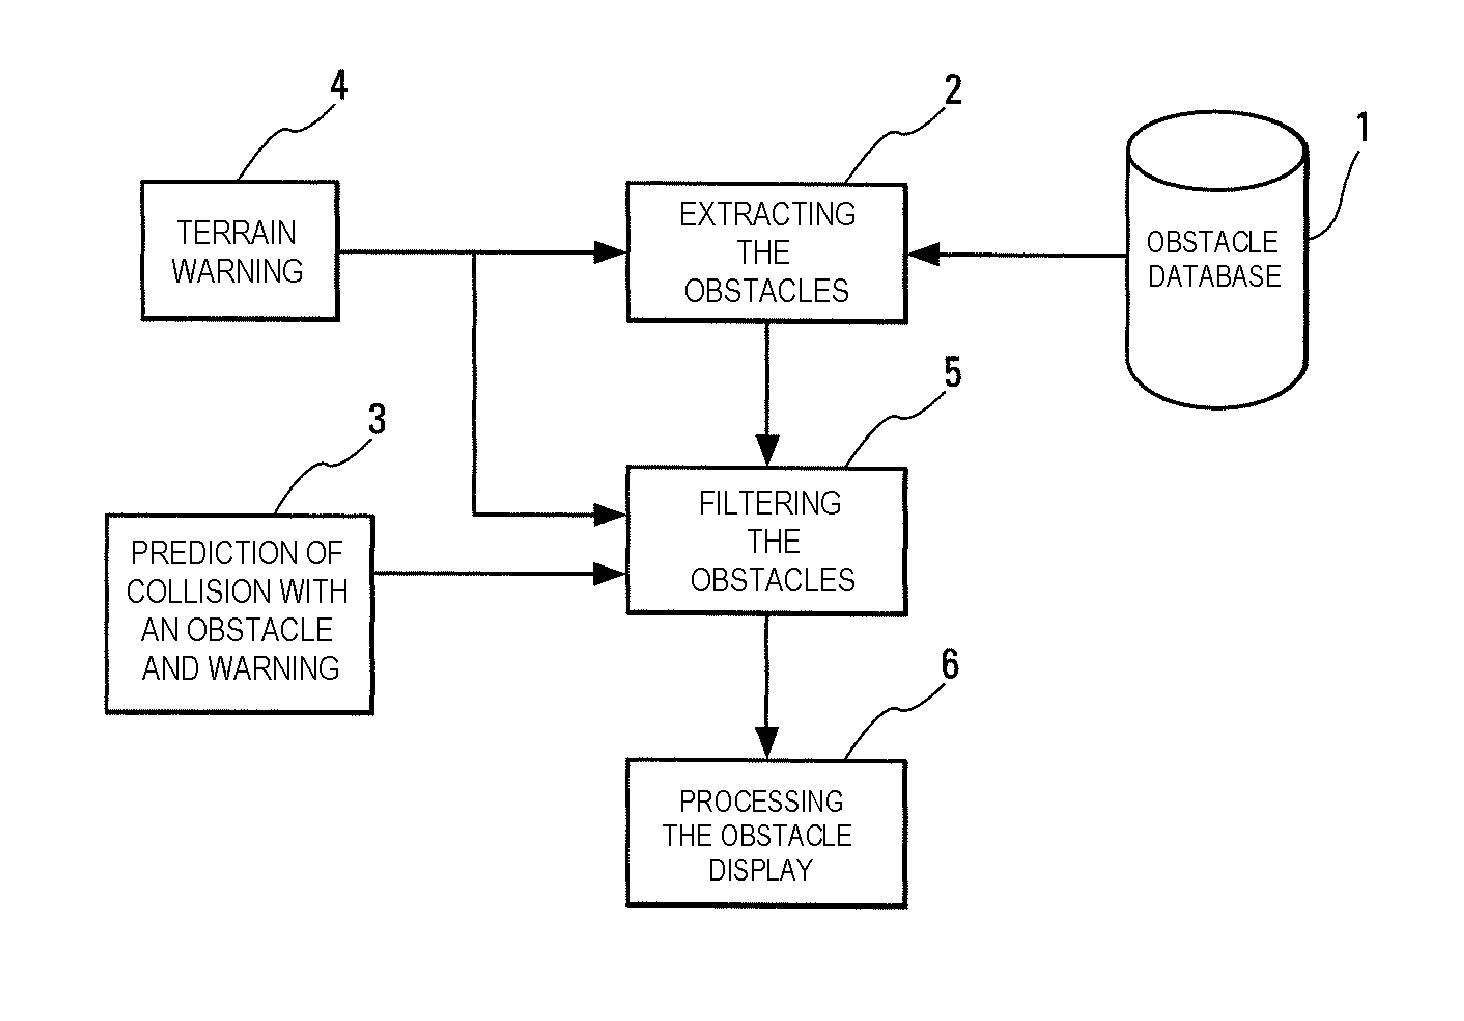 Method for optimizing the display of data relating to the risks presented by obstacles